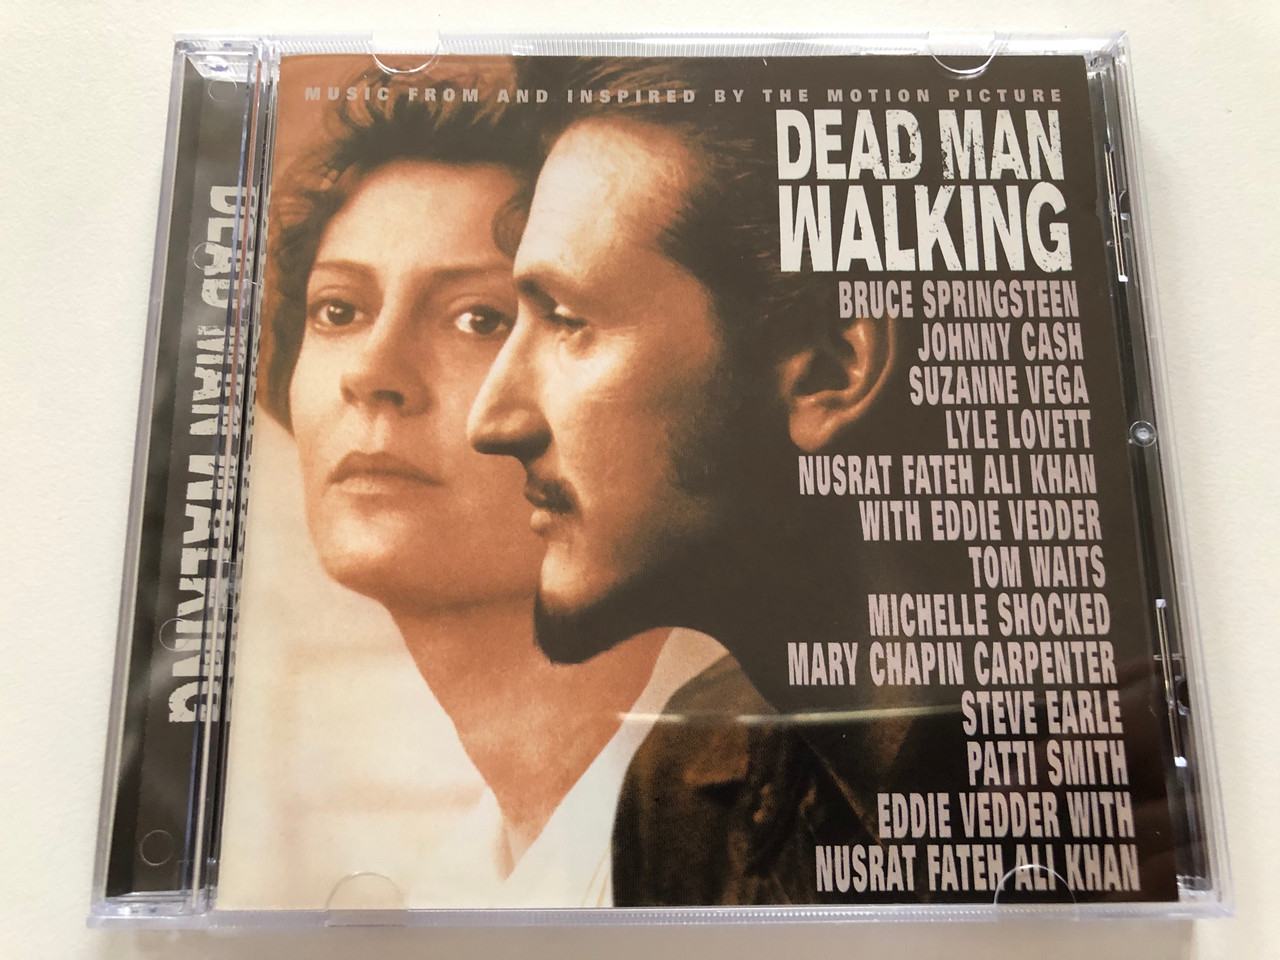 https://cdn10.bigcommerce.com/s-62bdpkt7pb/products/31183/images/183567/Dead_Man_Walking_Music_From_And_Inspired_By_The_Motion_Picture_Bruce_Springsteen_Johnny_Cash_Suzanne_Vega_Lyle_Lovett_Nusrat_Fateh_Ali_Khan_With_Eddie_Vedder_Tom_Waits_Columbia_Audio_1__40625.1625598569.1280.1280.JPG?c=2